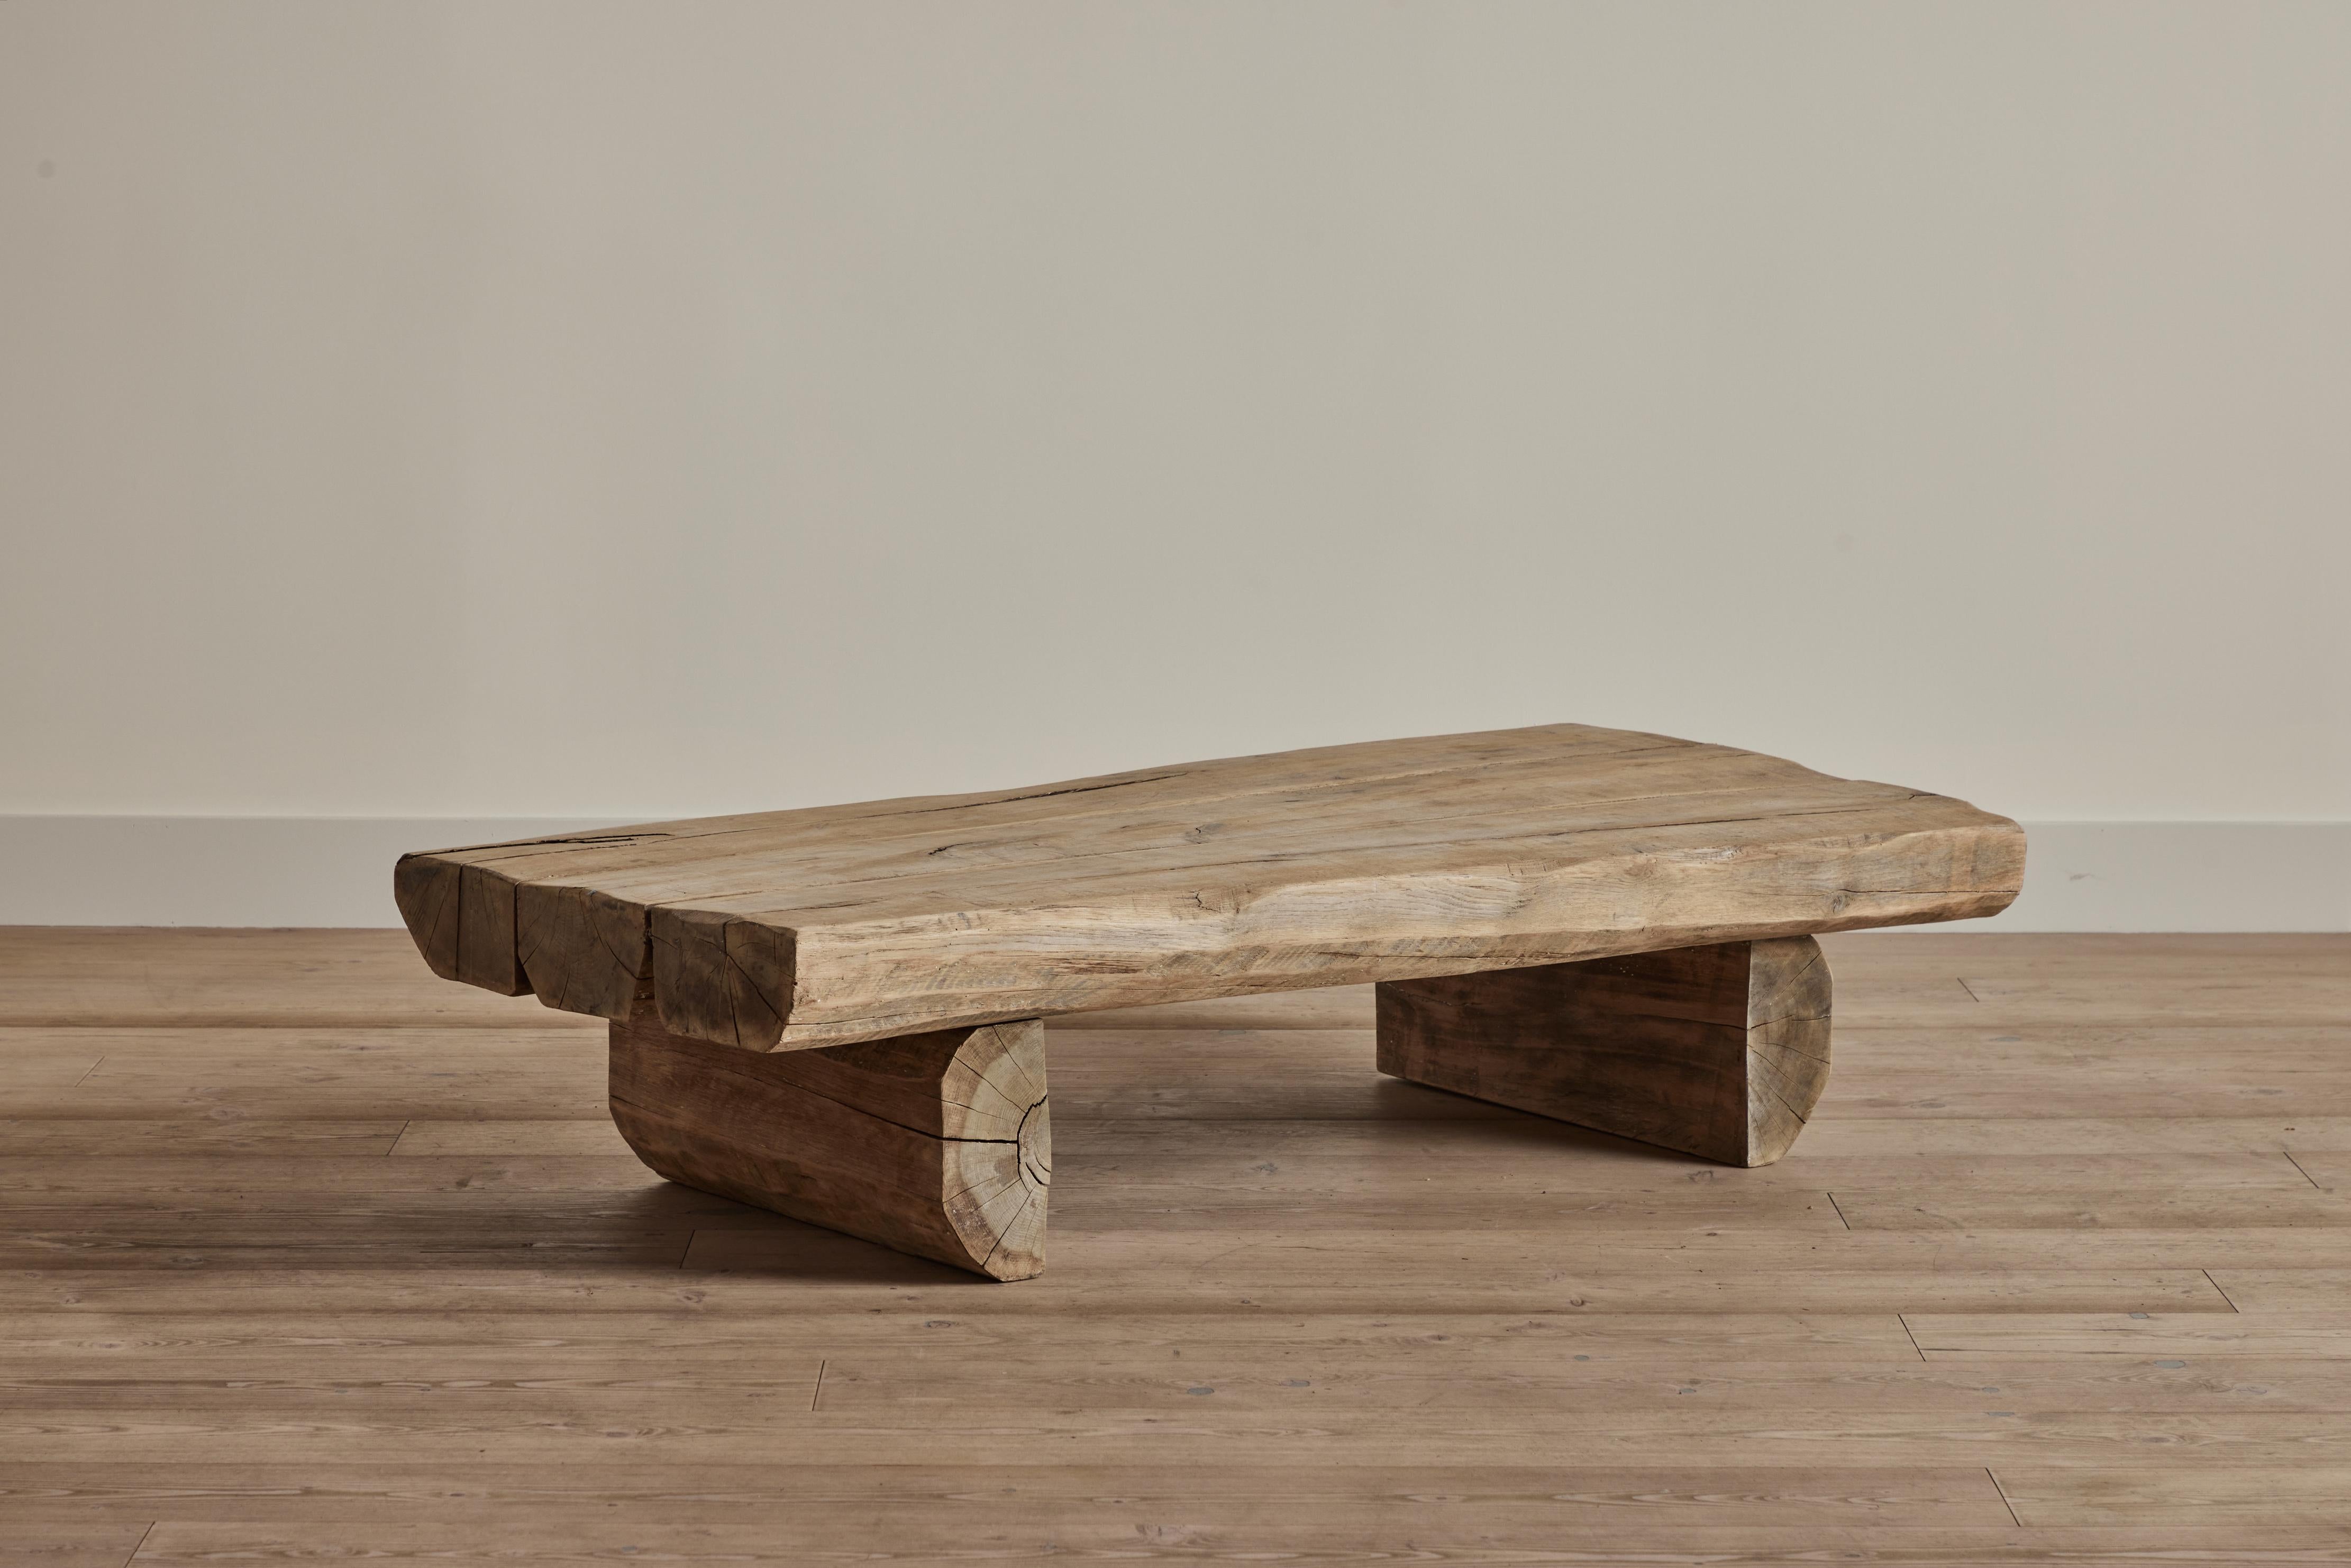 Brutalist low log rustic wood coffee table from Denmark circa 1960. Wear on wood is consistent with age and use. 